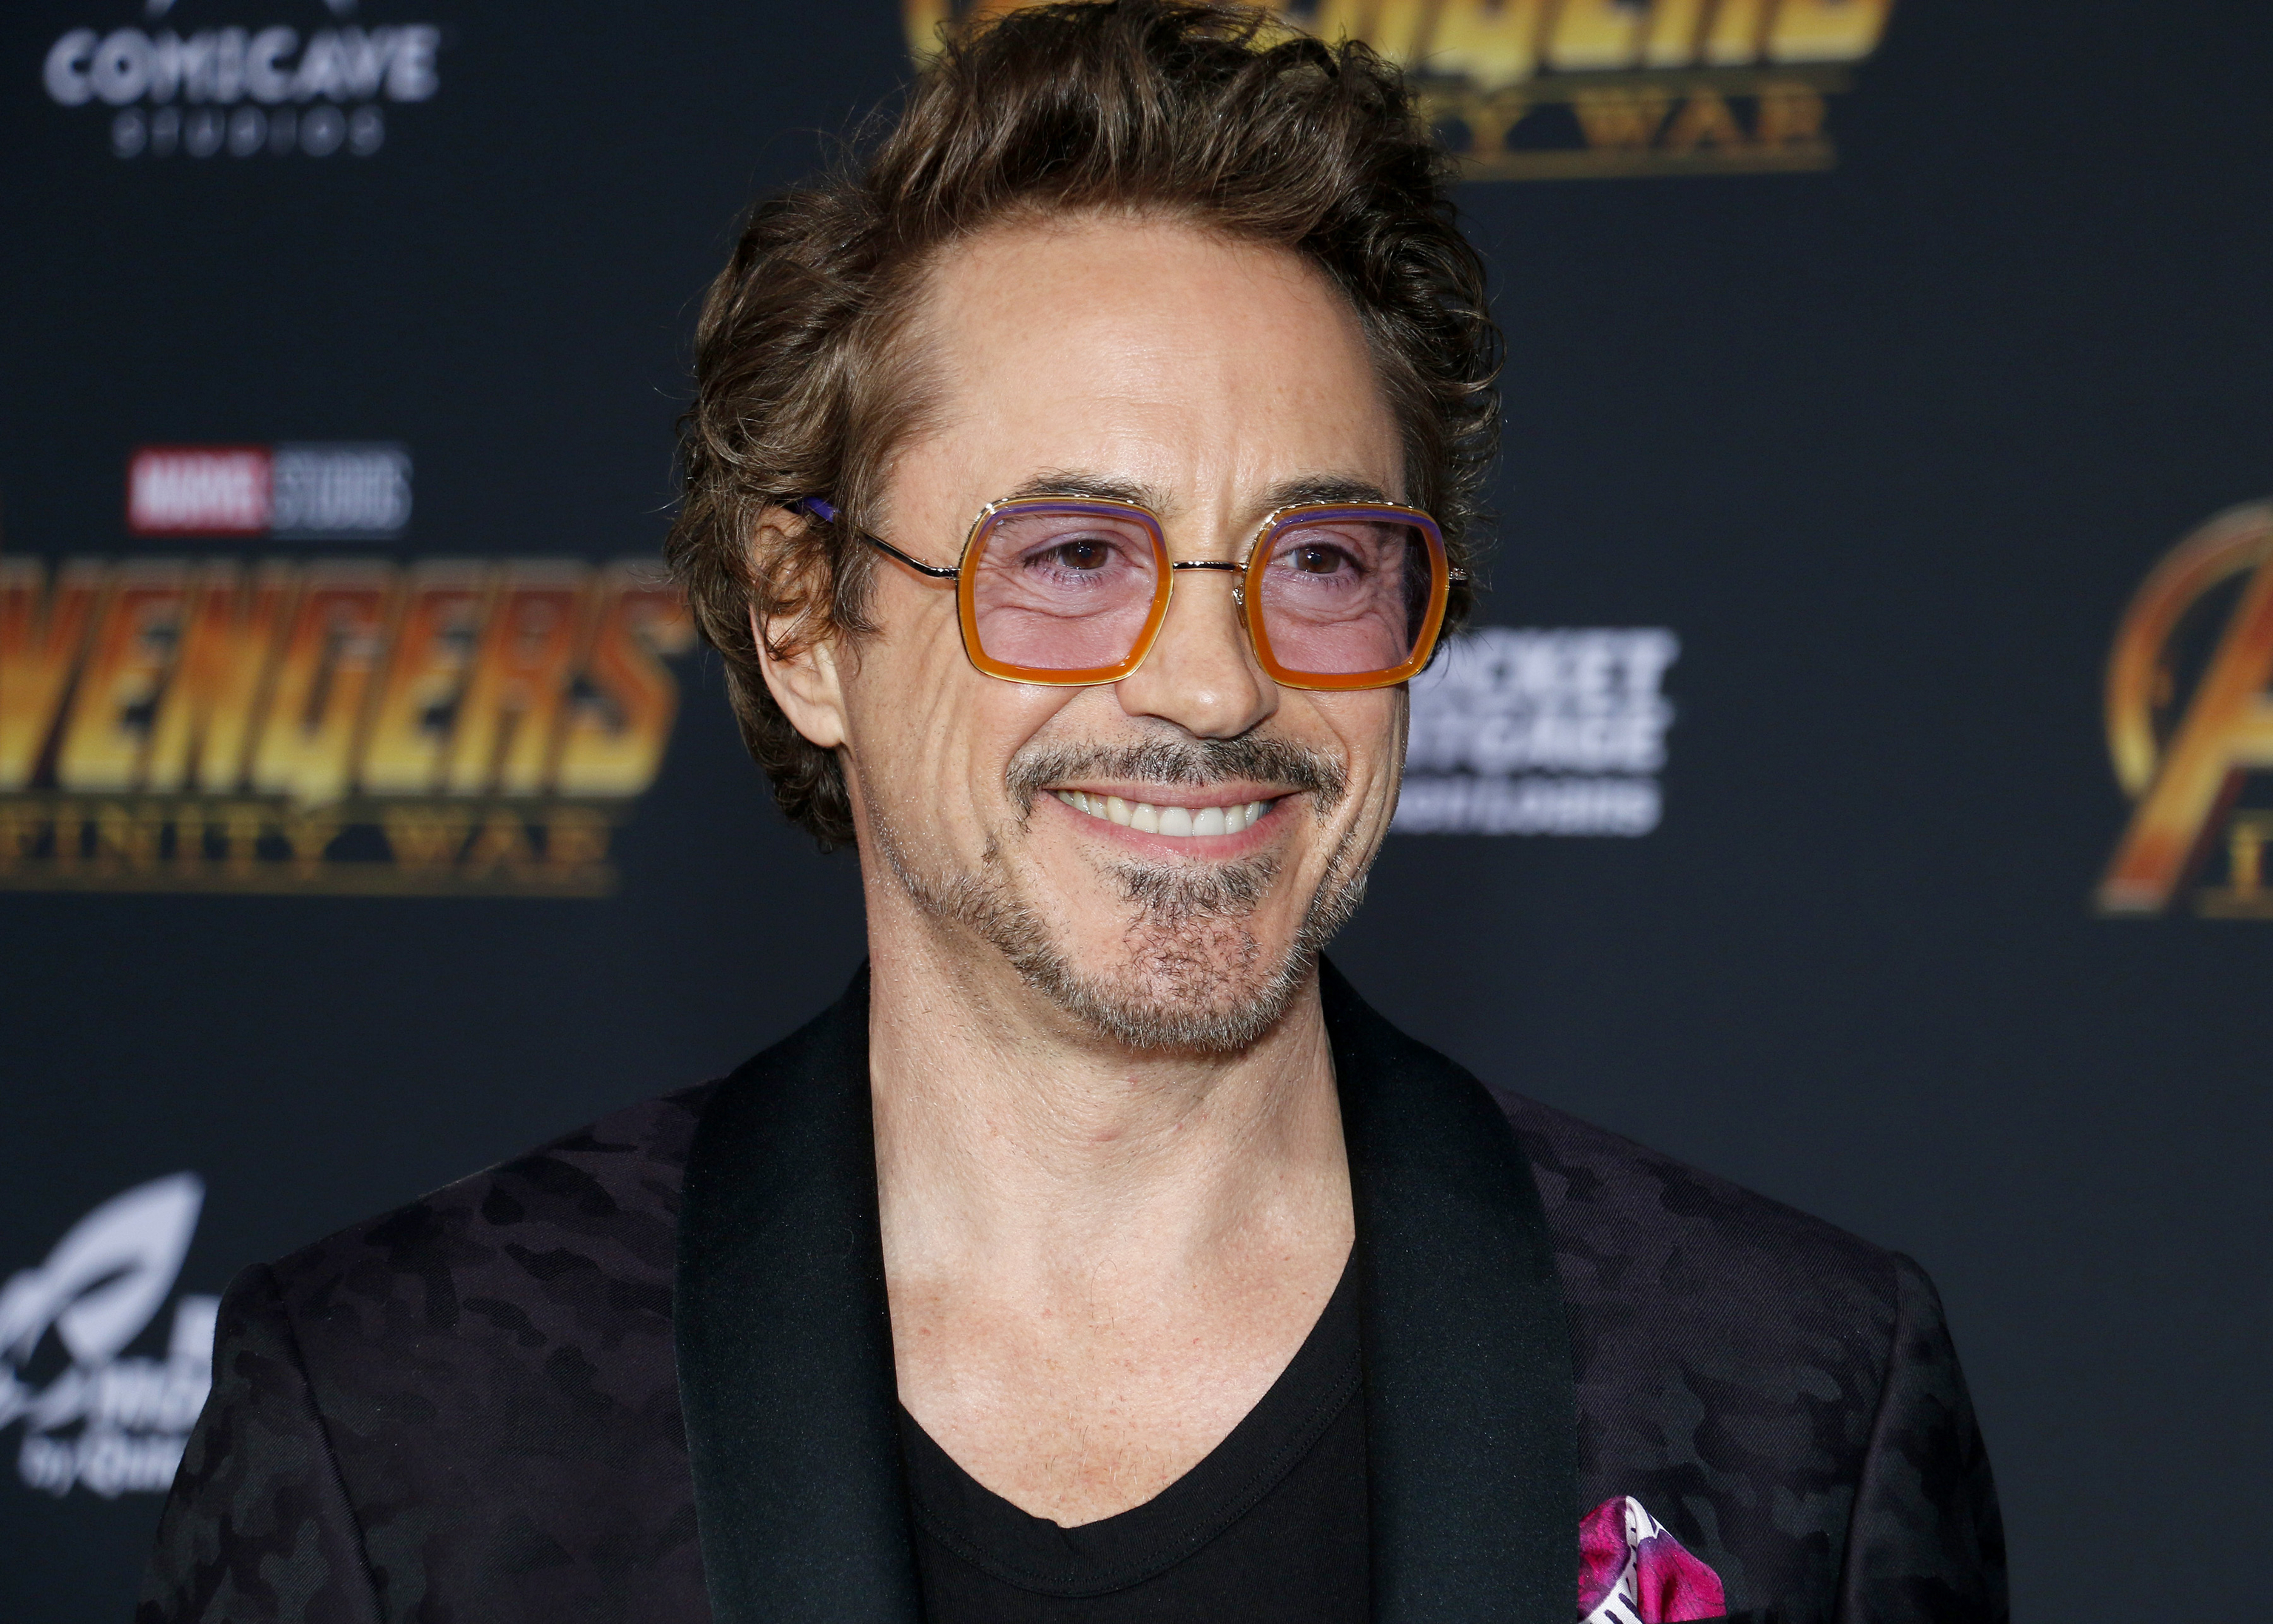 Robert Downey Jr. at the premiere of Disney and Marvel's 'Avengers: Infinity War' held at the El Capitan Theatre in Hollywood, USA on April 23, 2018.